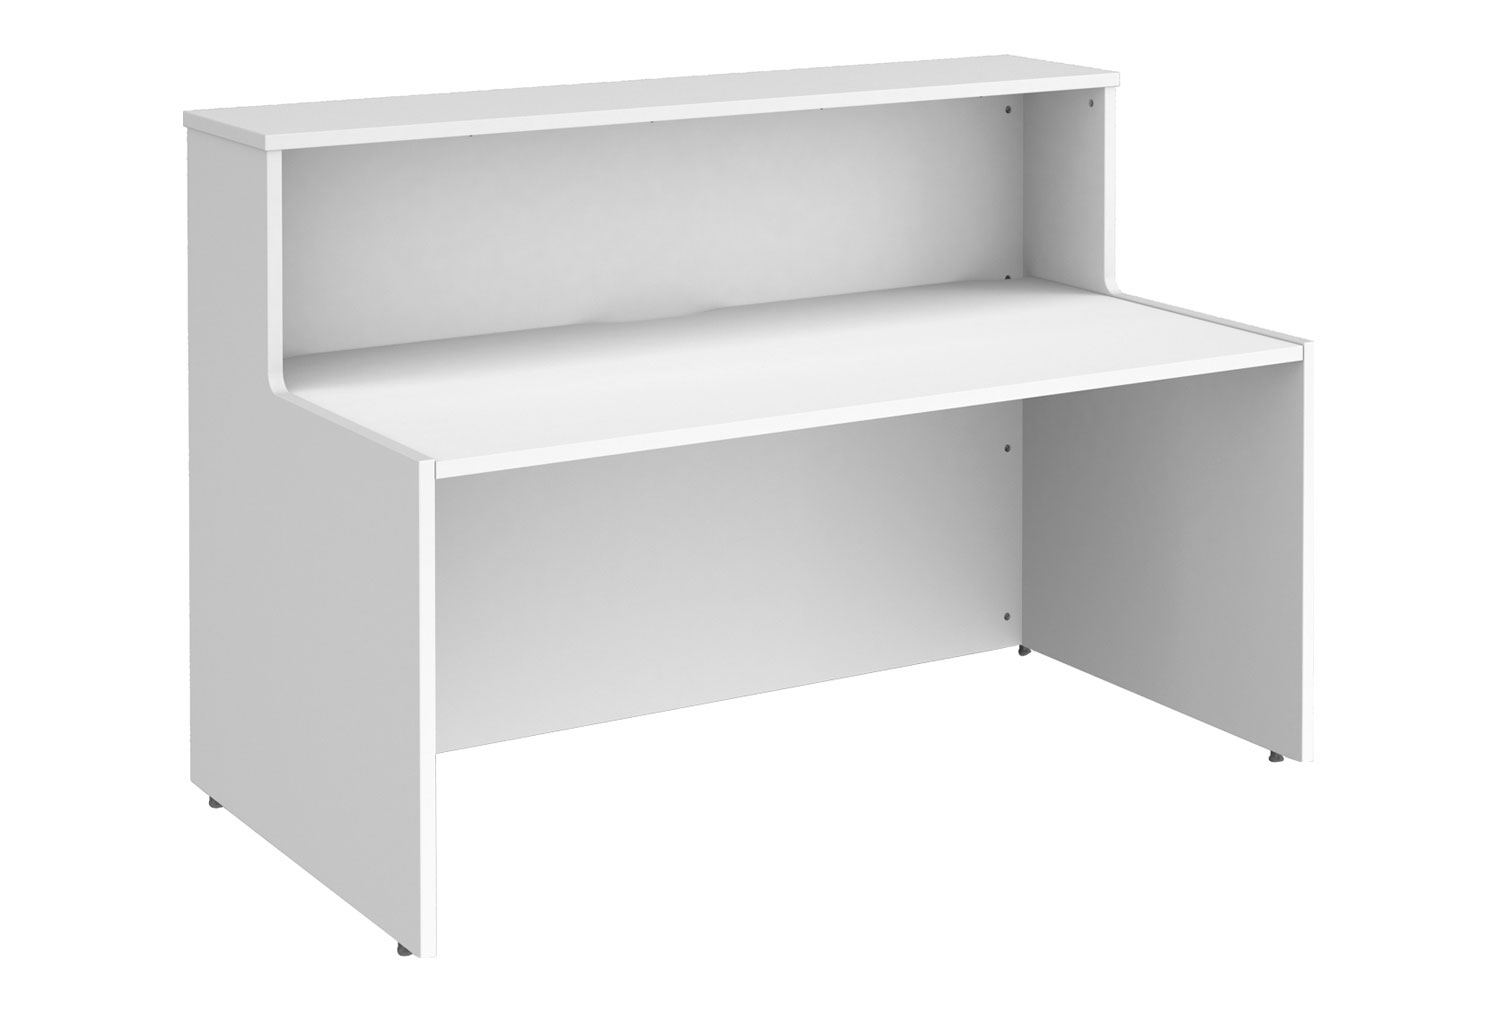 Salute Panel End Reception Desk, 146w (cm), White, Fully Installed